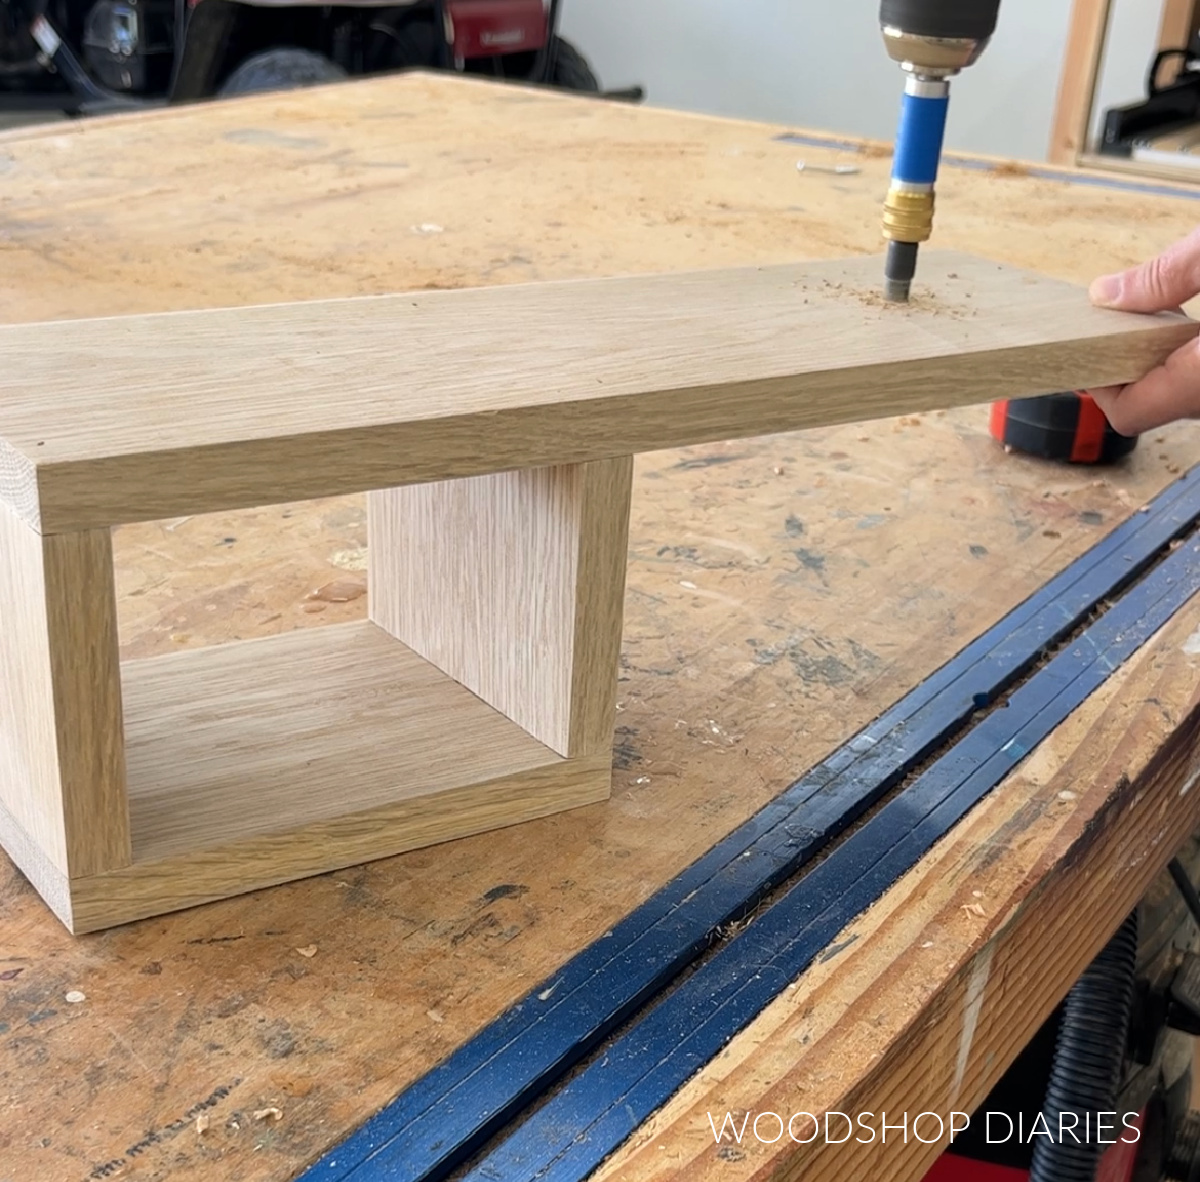 Predrilling holes into end of bottom of tea station tray